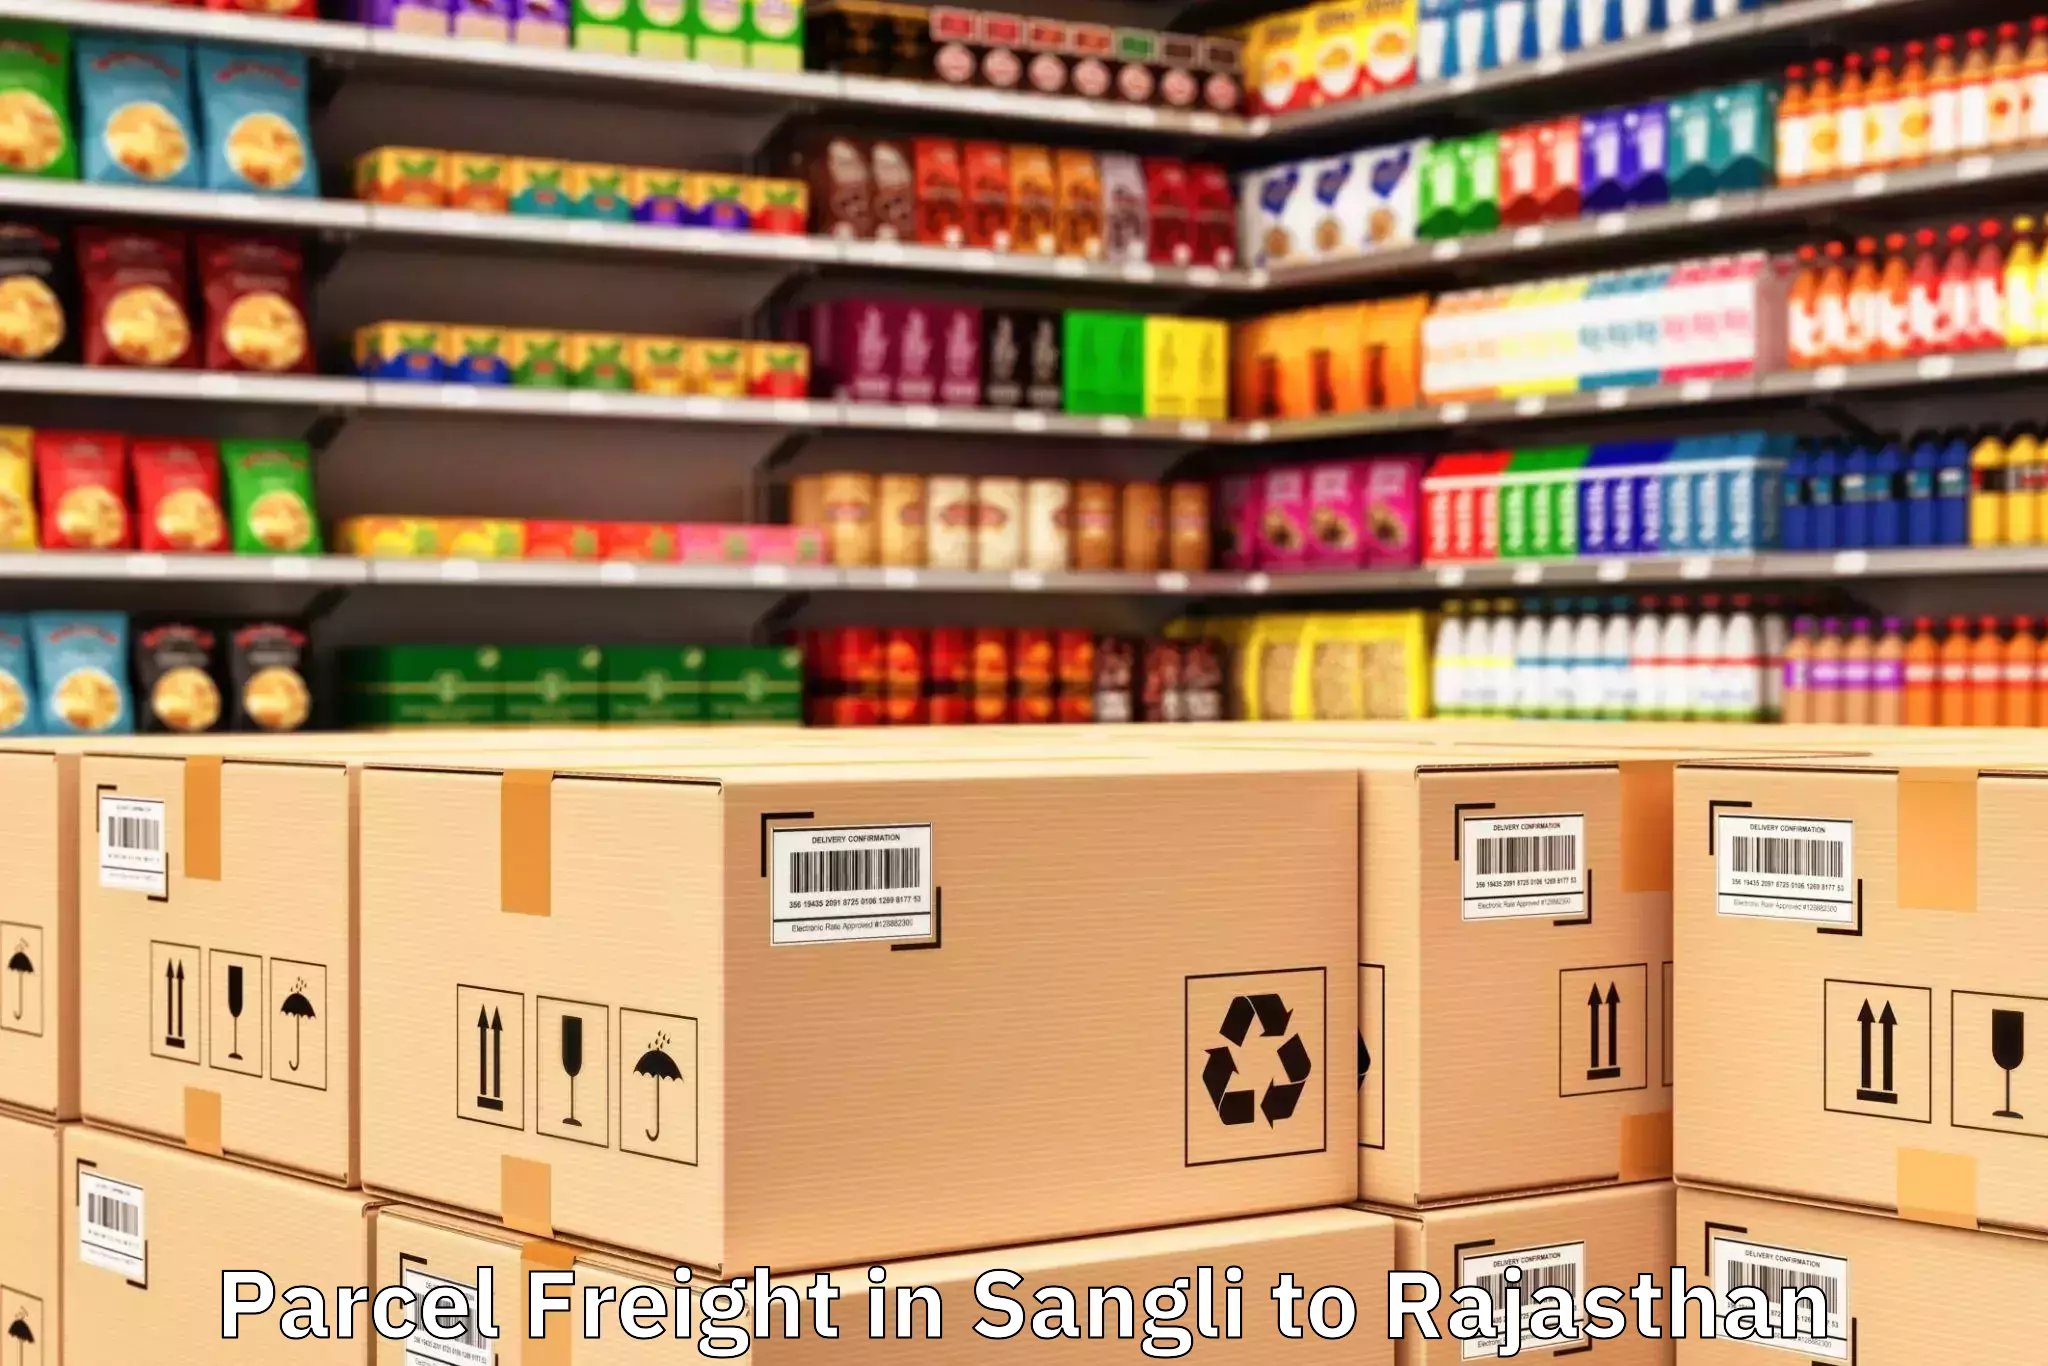 Top Sangli to Rajasthan Parcel Freight Available